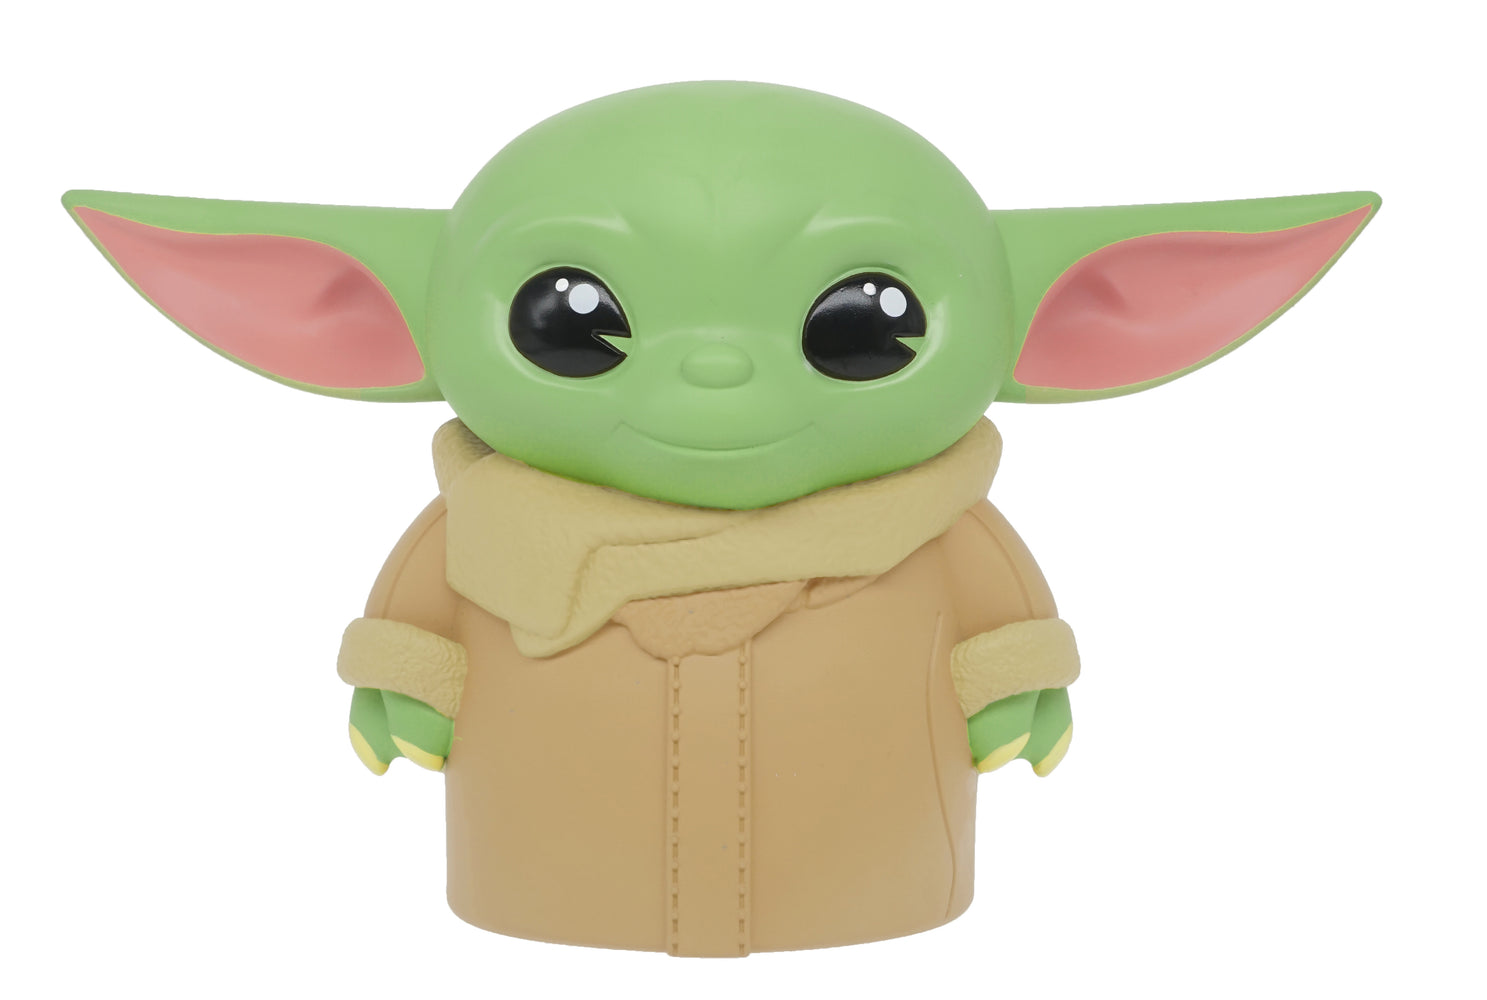 Star Wars - Yoda 'The Child' PVC Figural Bust Bank for Coins